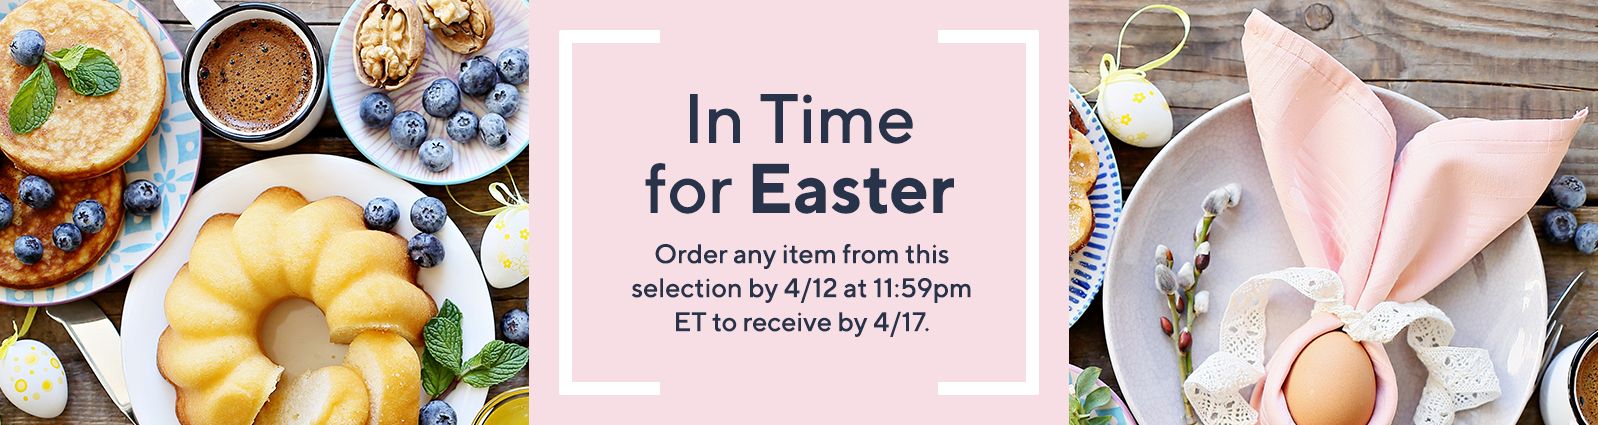 In Time for Easter: Order any item from this selection by 4/12 at 11:59pm ET to receive by 4/17.